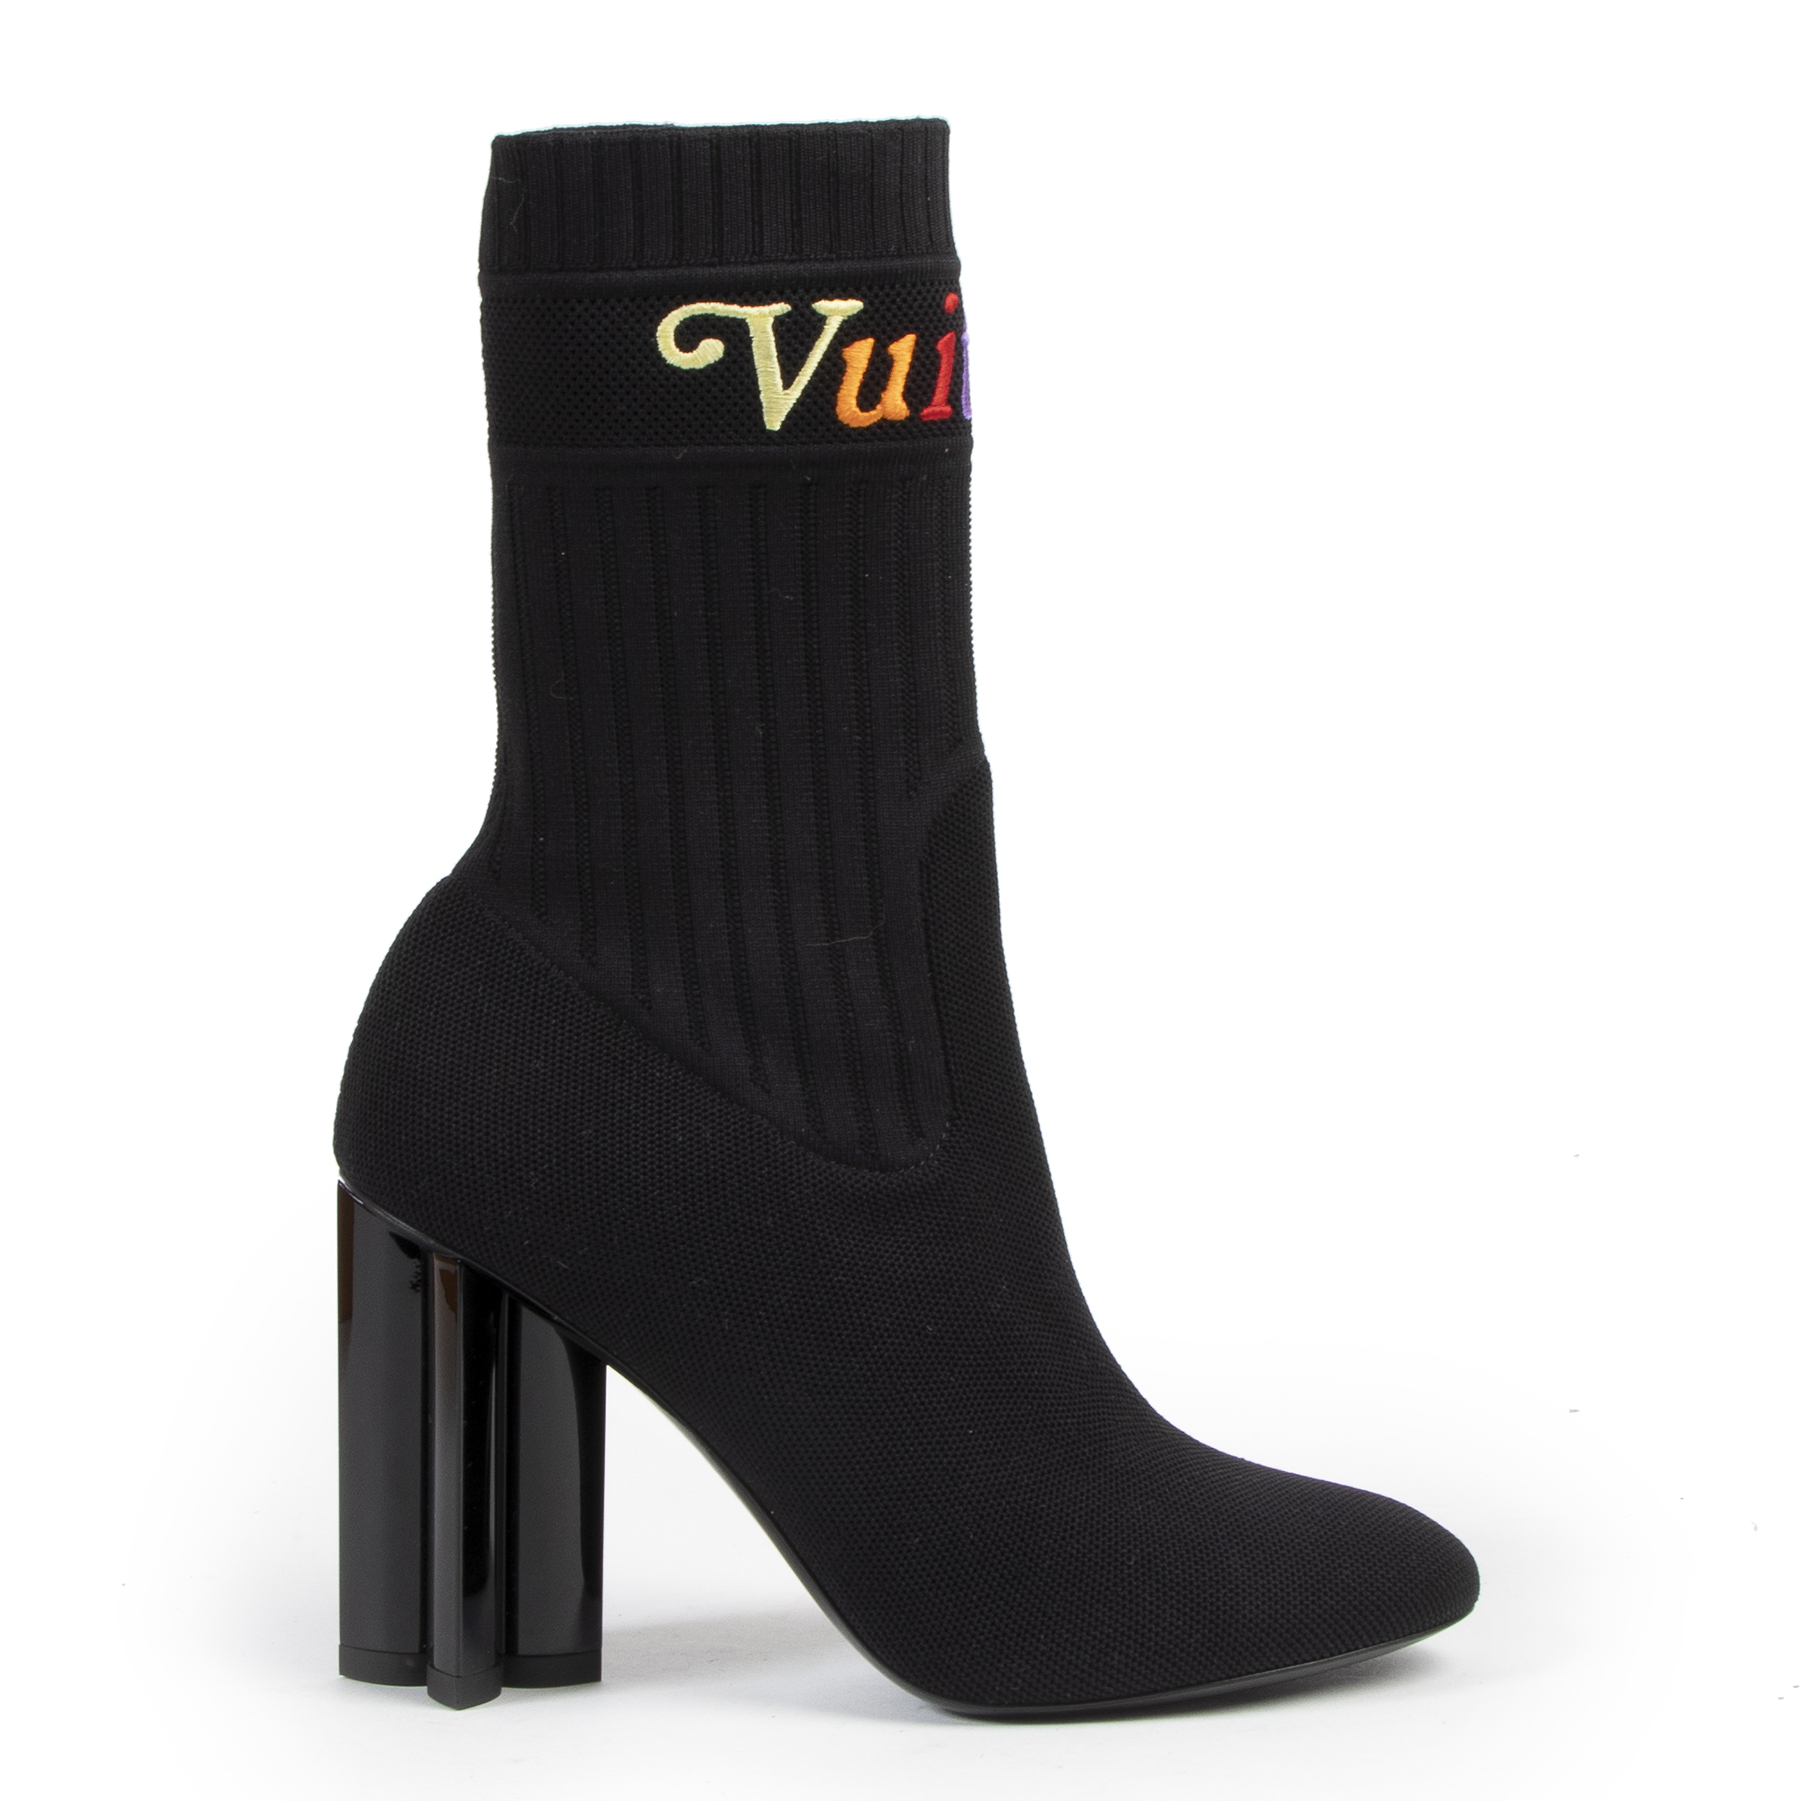 Louis Vuitton - Authenticated Silhouette Ankle Boots - Cloth Black for Women, Very Good Condition